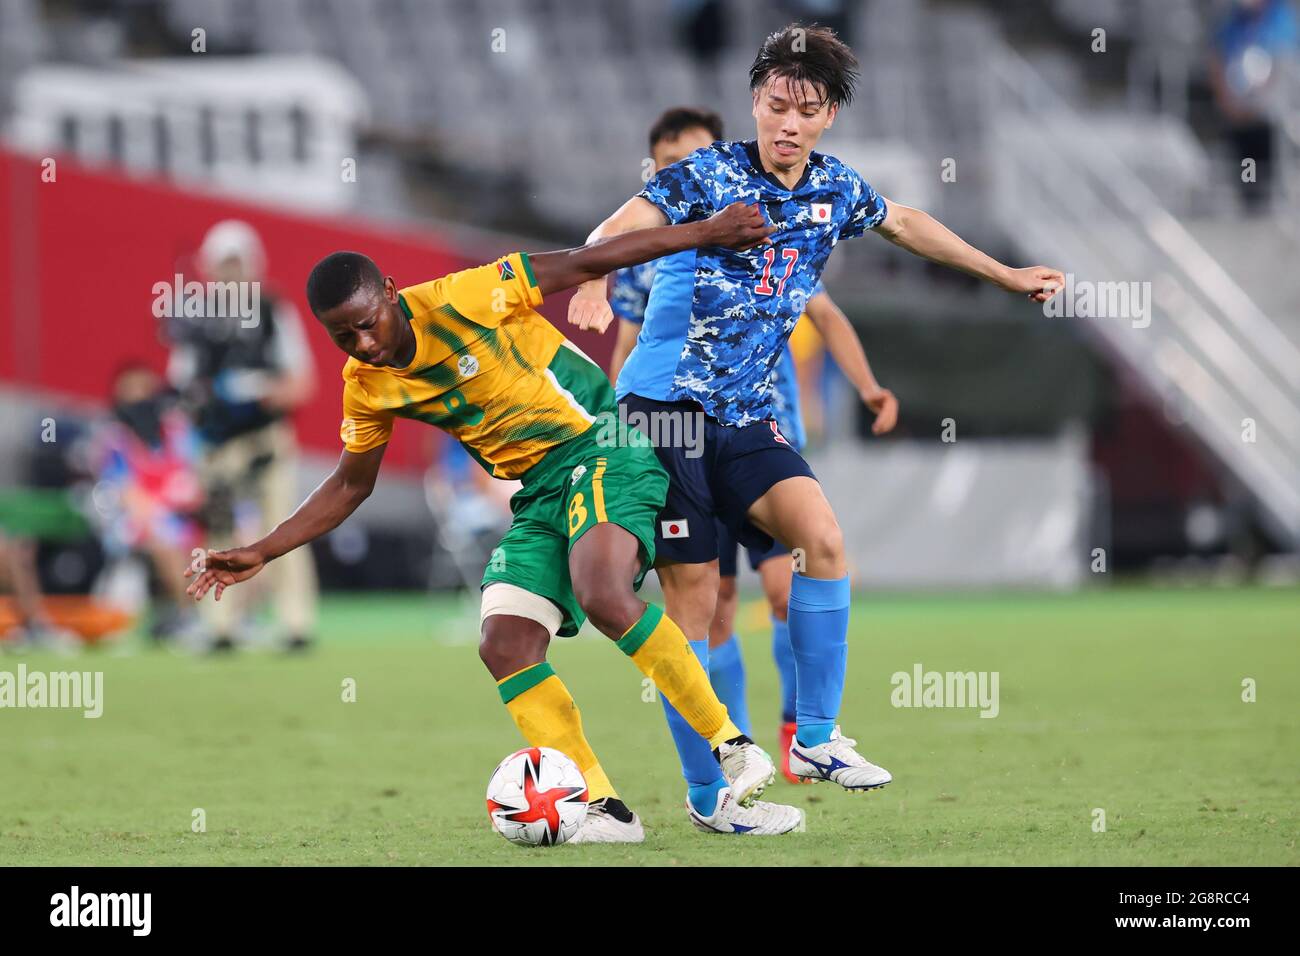 Tokyo, Japan. 22nd July, 2021. (L to R) Thabo Cele (RSA), Ao Tanaka (JPN) Football/Soccer : Men's First Round Group A match between Japan 1-0 South Africa during the Tokyo 2020 Olympic Games at the Tokyo Stadium in Tokyo, Japan . Credit: Naoki Morita/AFLO SPORT/Alamy Live News Stock Photo